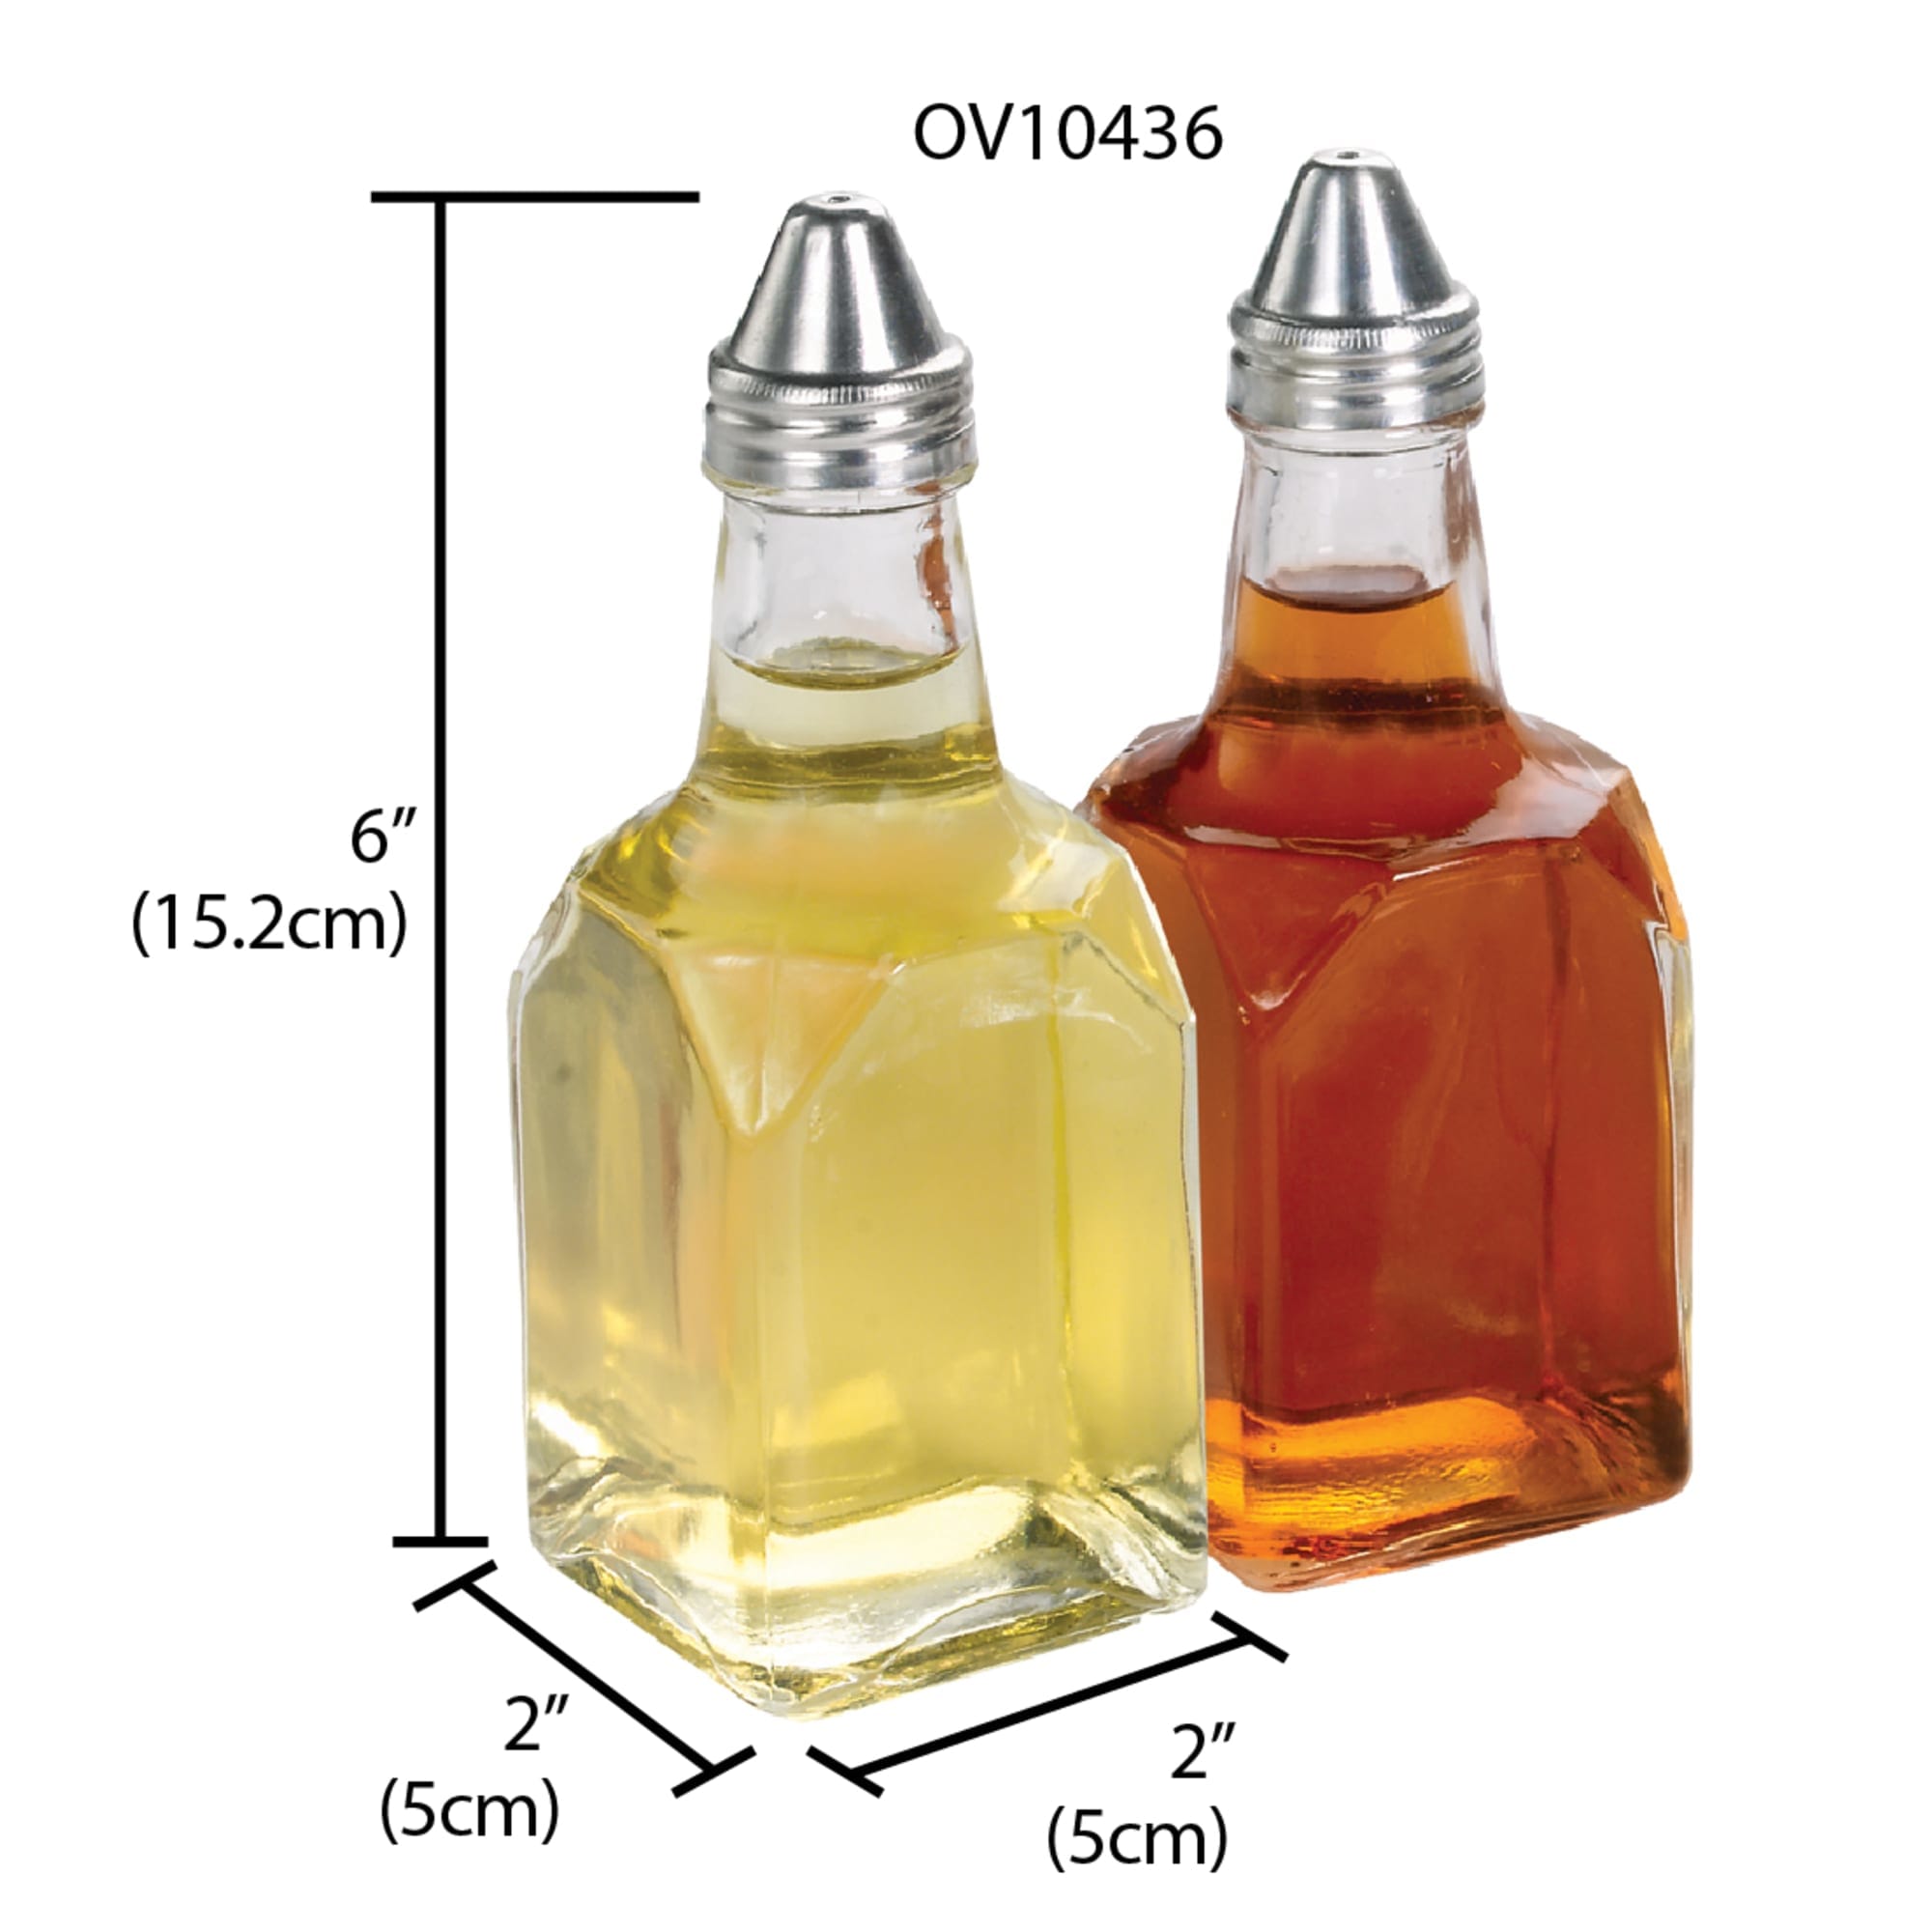 Home Basics 2 Piece Oil and Vinegar Set $3.00 EACH, CASE PACK OF 24